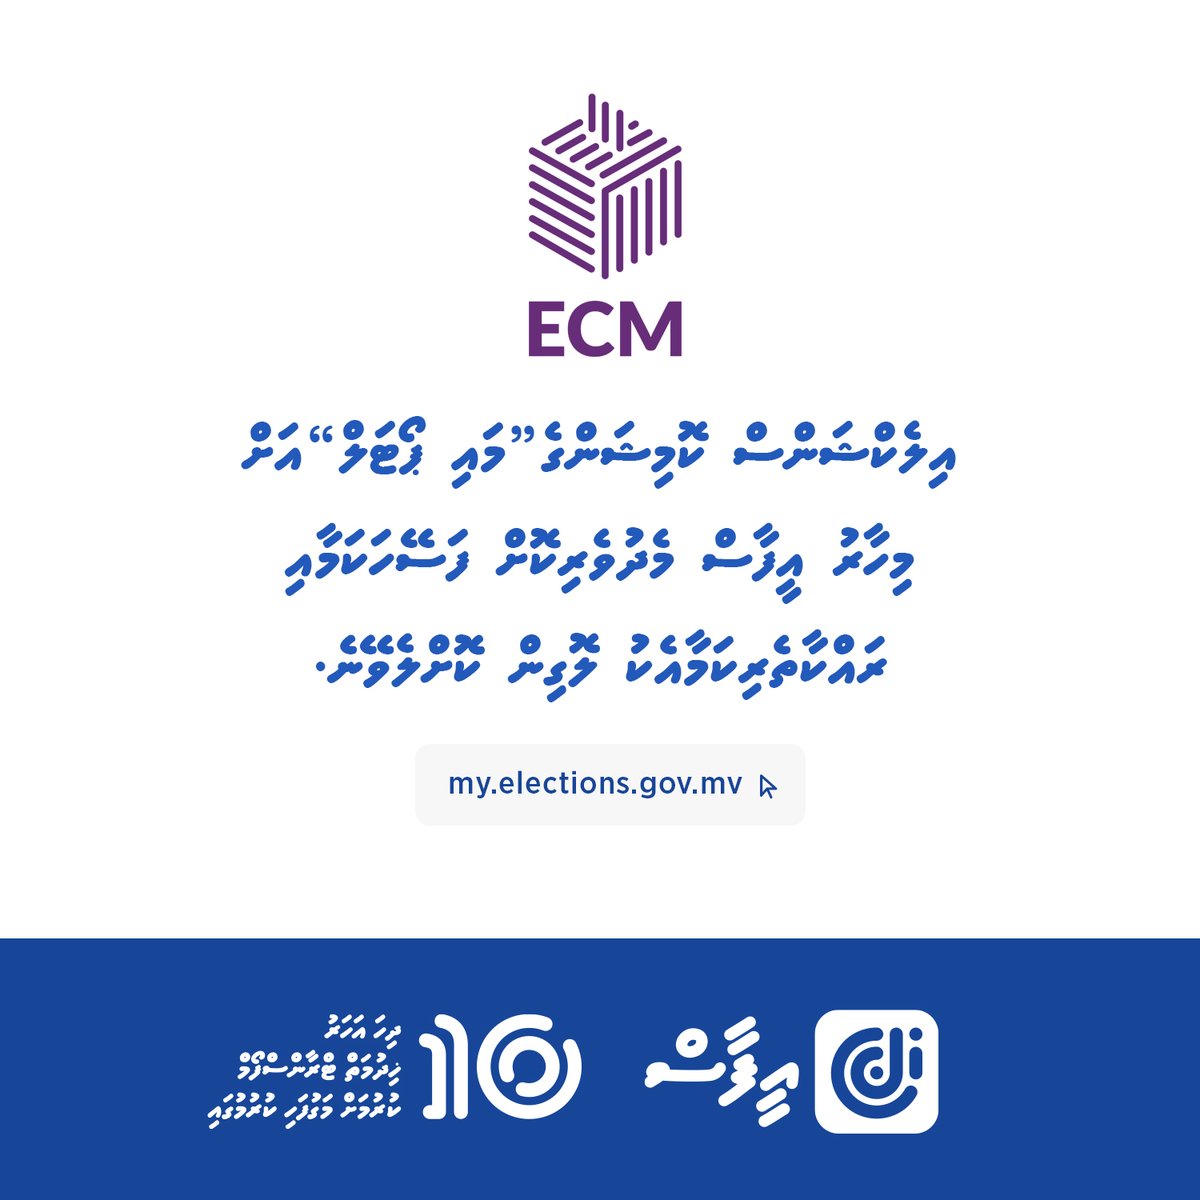 We are excited to announce that eFaas is now integrated to 'My Portal' of @ElectionsMv. Now users can conveniently and safely login to the portal using their eFaas. Link: my.elections.gov.mv #efaas #digitalidentity #DigitalMaldives #TransformGovernment